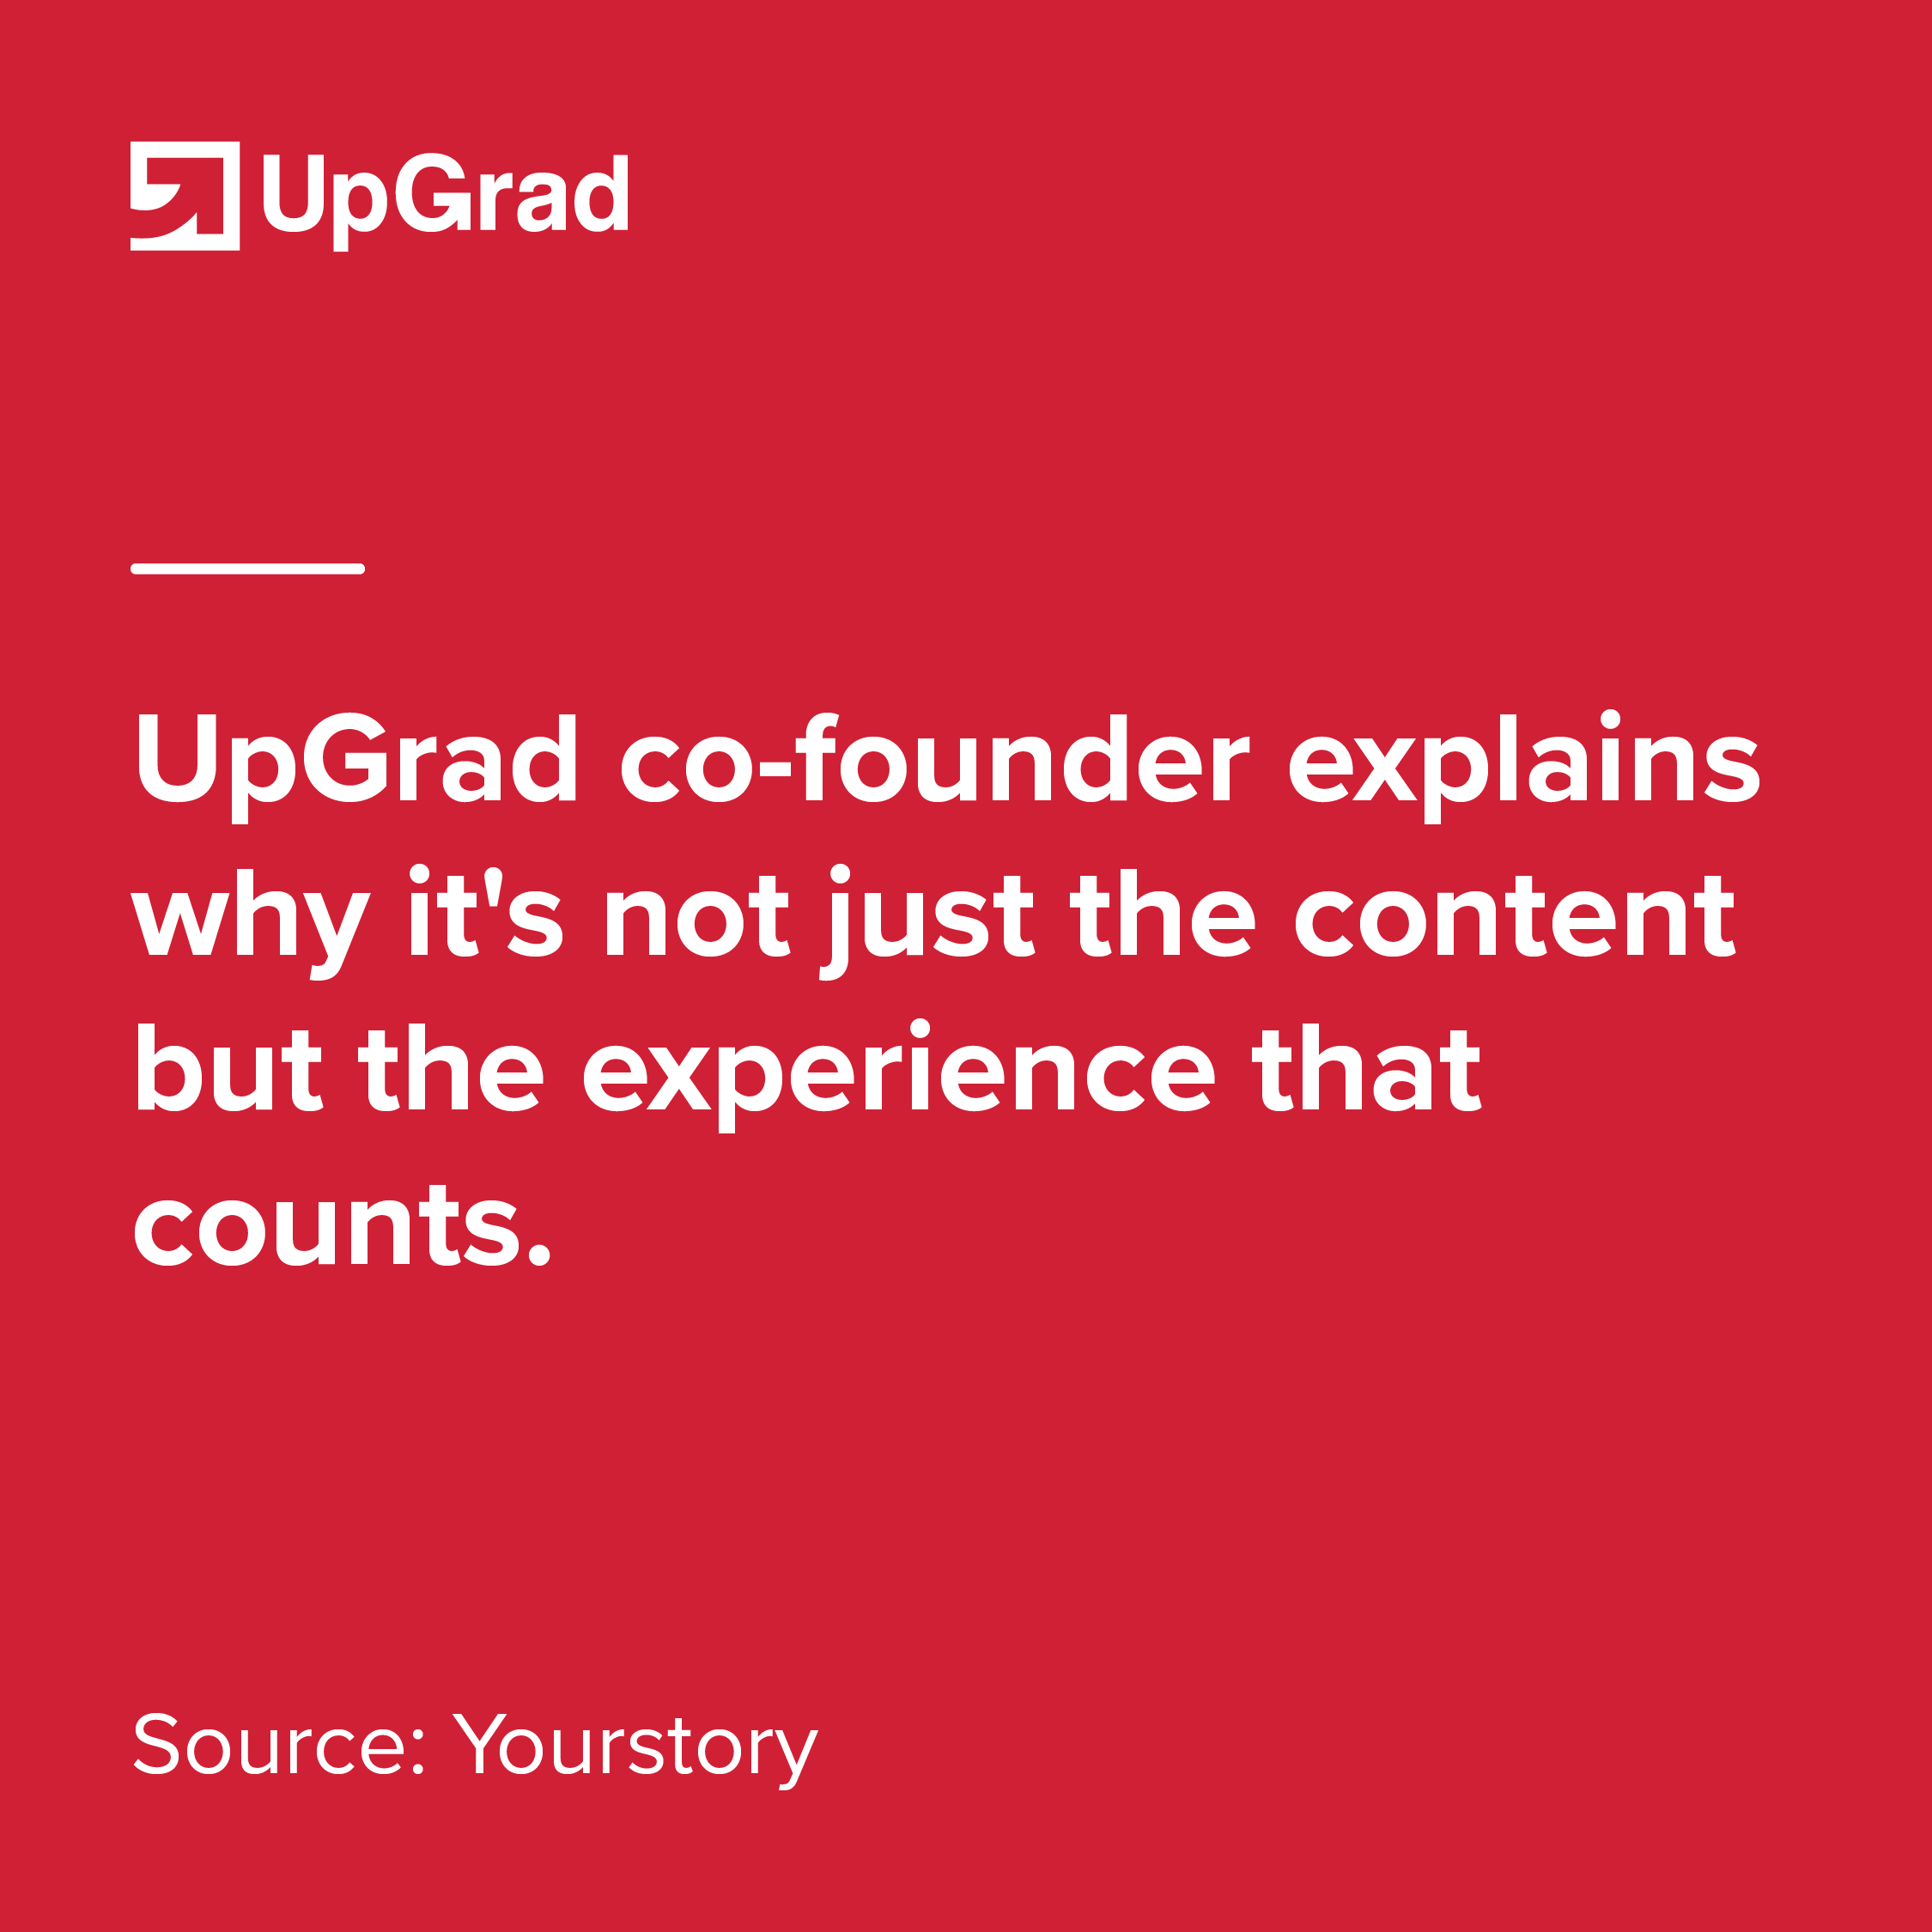 upgrad cofounder explains why experience counts